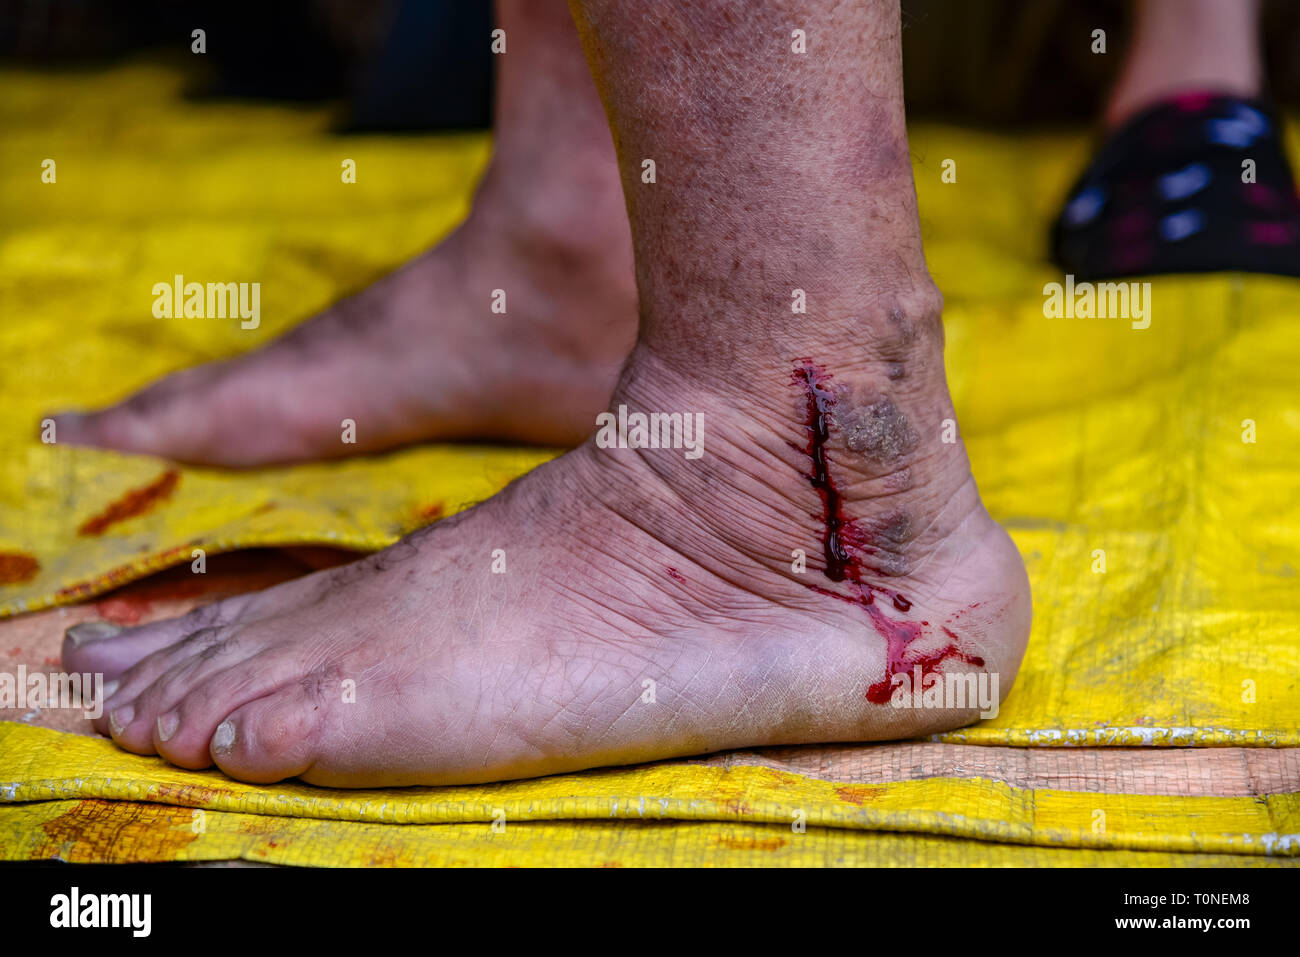 Impure blood seen coming out of a Kashmiri patient's foot during the leech treatment. A traditional health worker uses leeches to suck impure blood as part of a treatment at Hazratbal on the banks of the Dal Lake on the outskirts of Srinagar Summer capital of Indian administered Kashmir. Every year traditional health workers in Kashmir use leeches to treat people for itchy, painful lumps that develop on the skin called chilblains acquired during winter. Thousands of patients suffering from various skin problems receives leech treatment at Hazratbal in Srinagar. Stock Photo